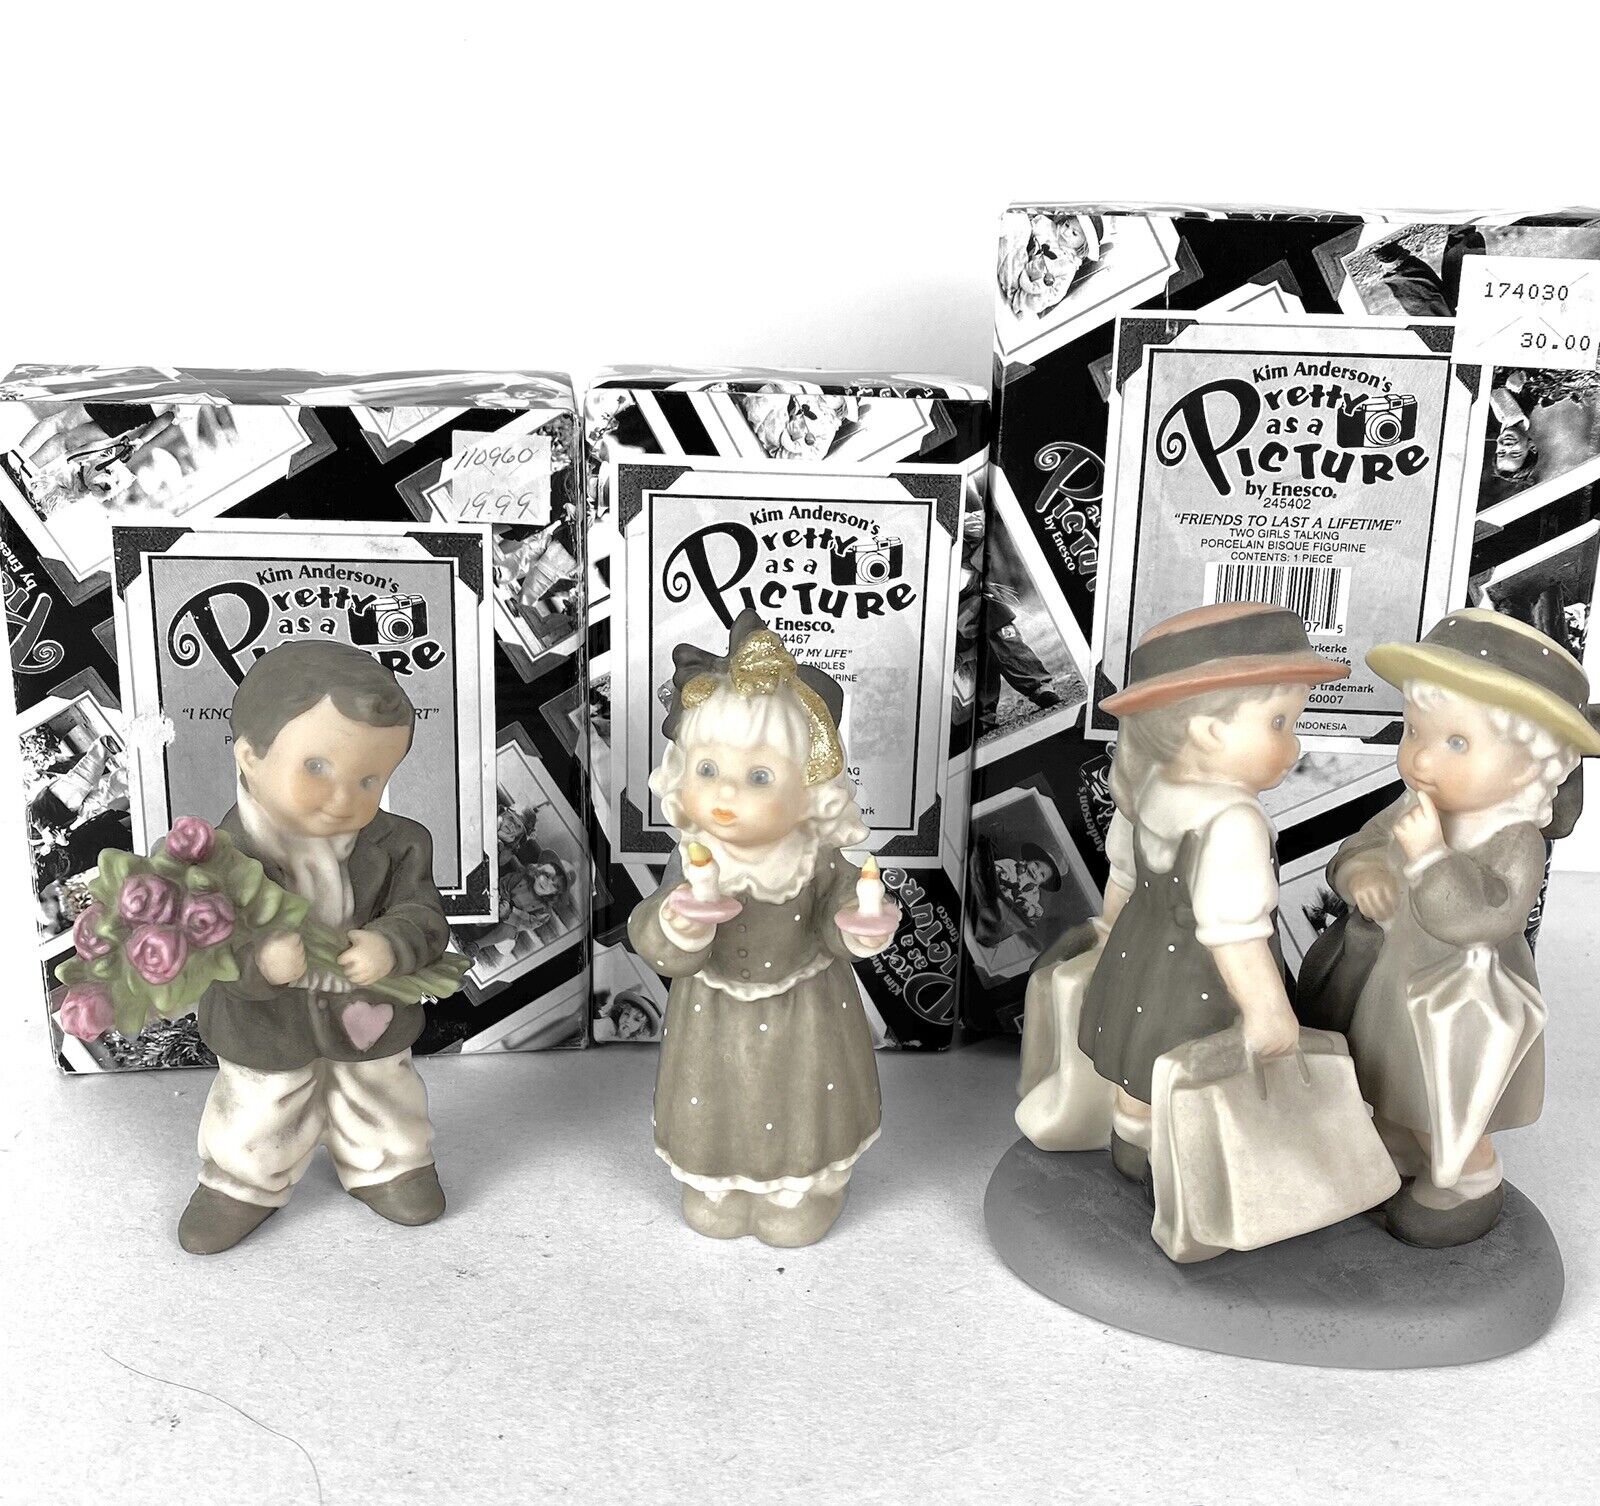 Kim Anderson’s Pretty as a Picture Figurines Set 3 Lifetime Light Up Win A Heart